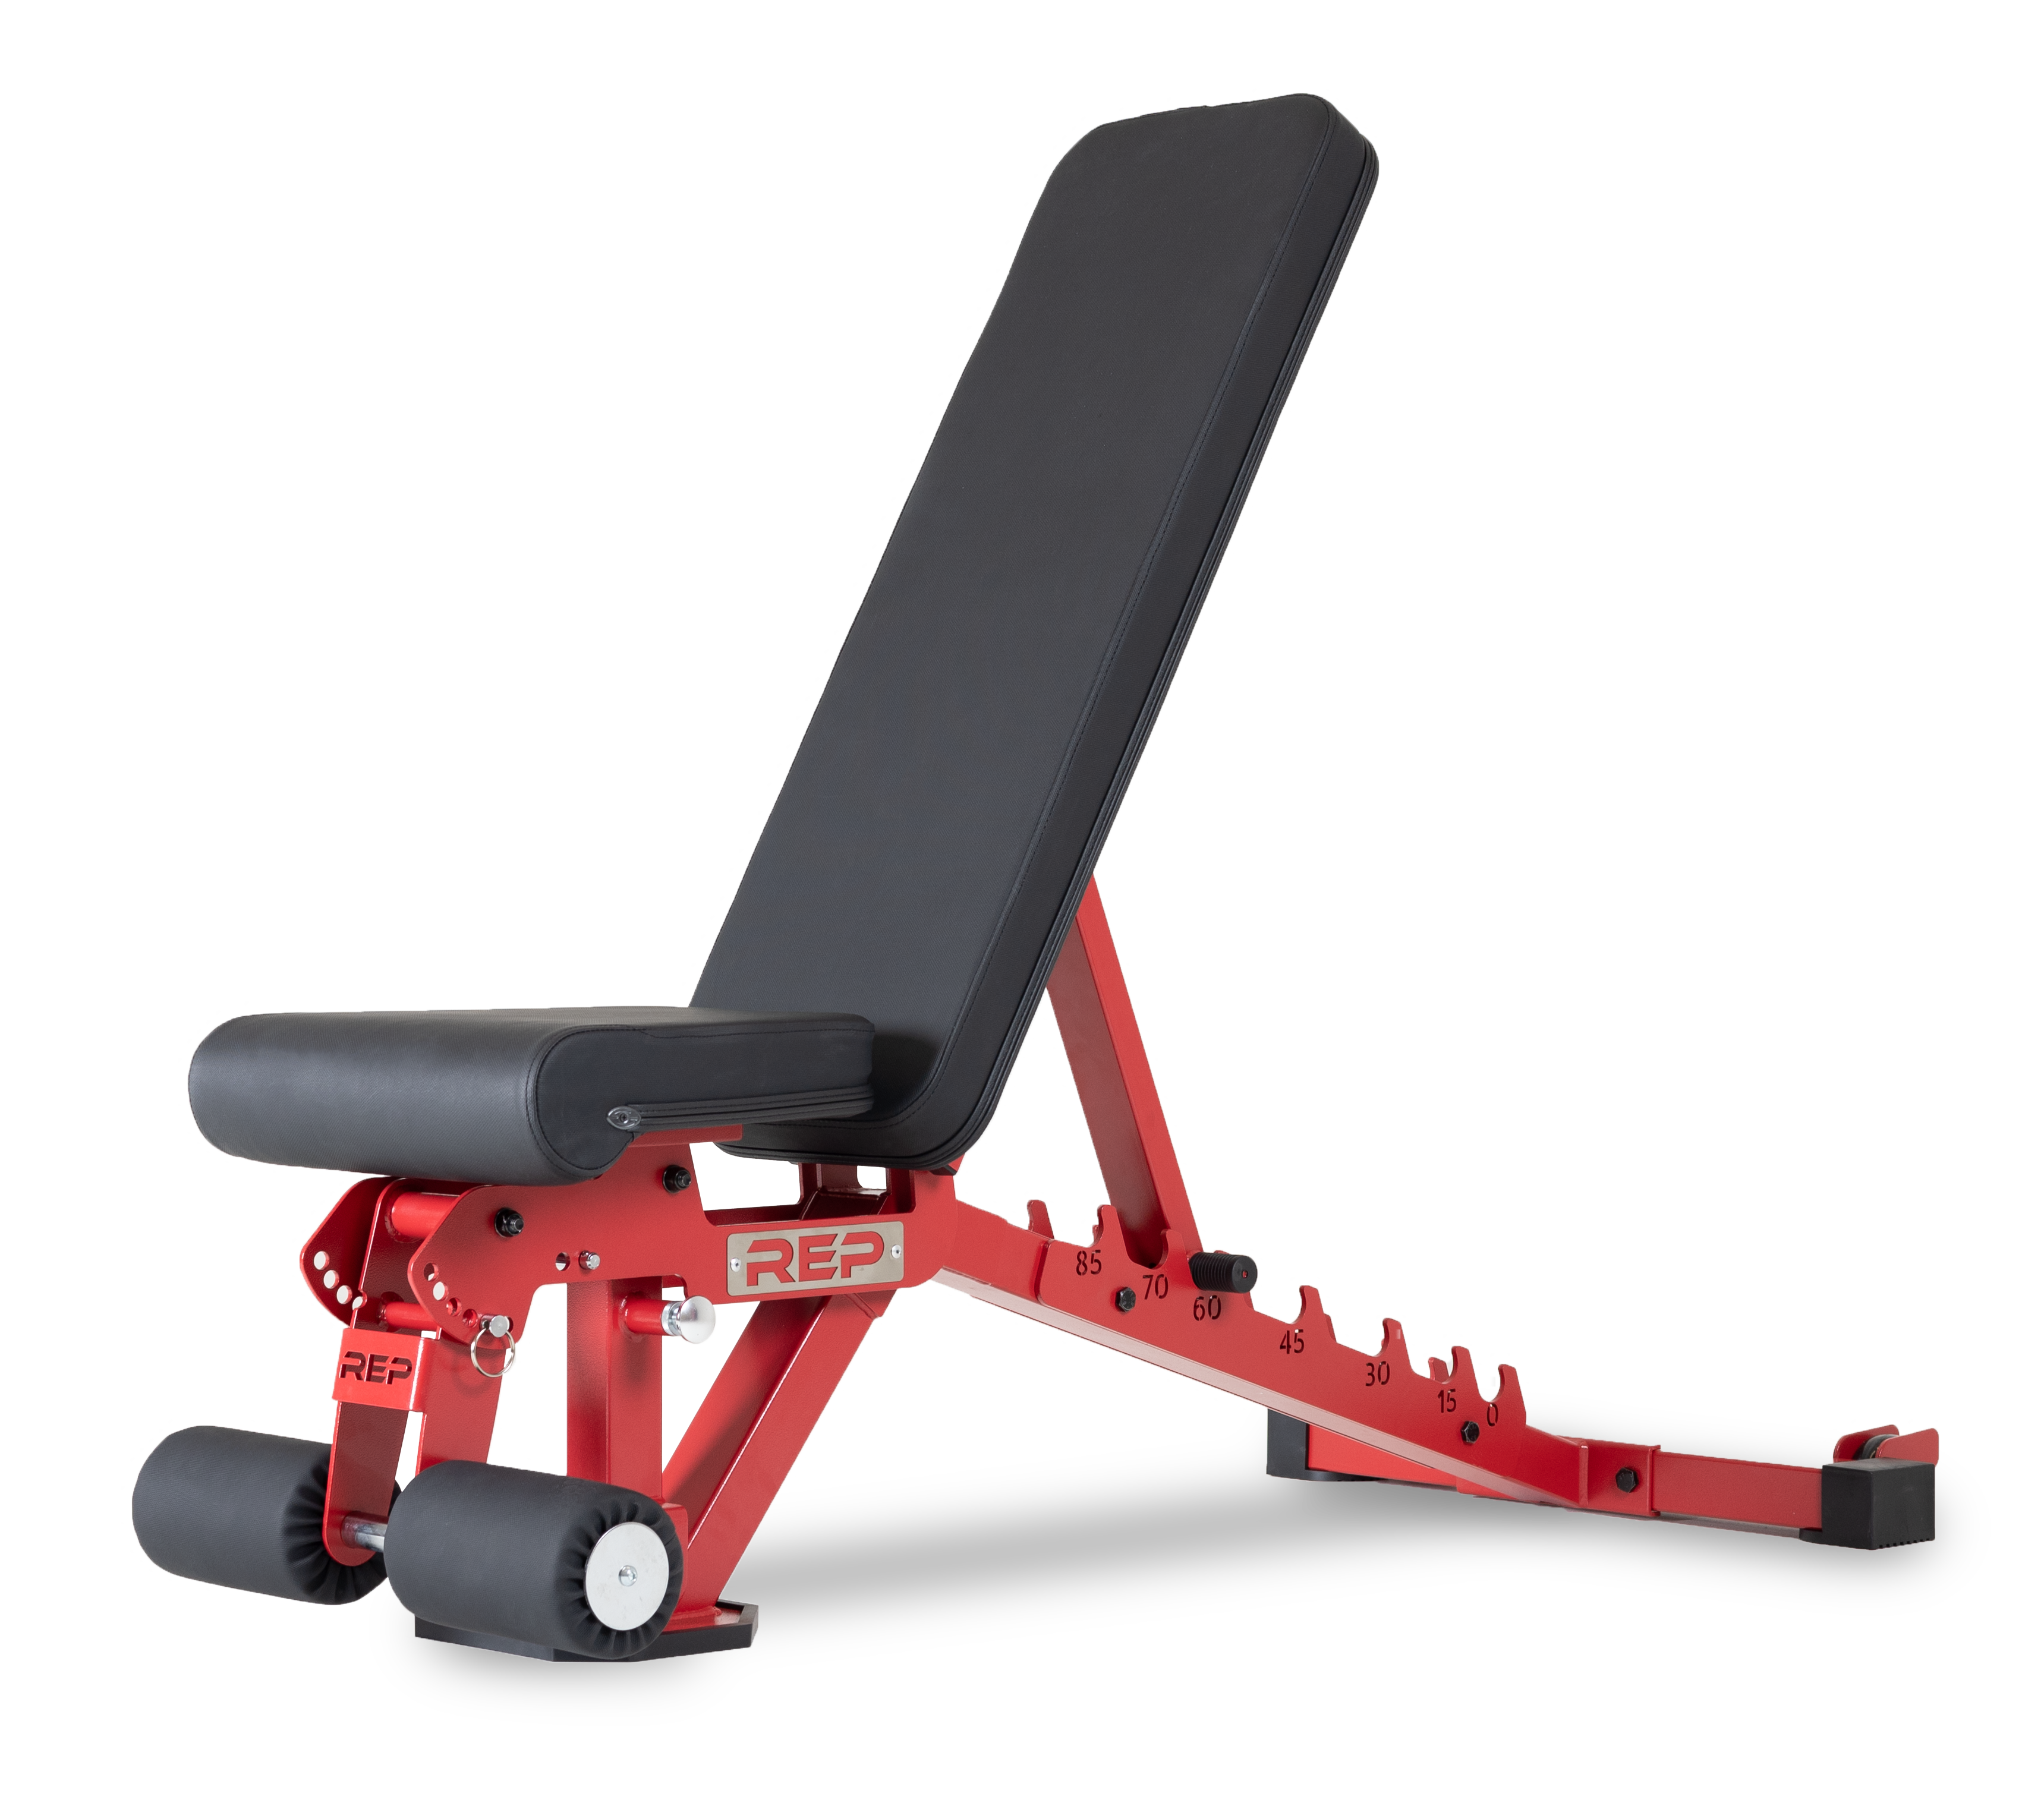 AB-3000 2.0 FID Adjustable Weight Bench - Red